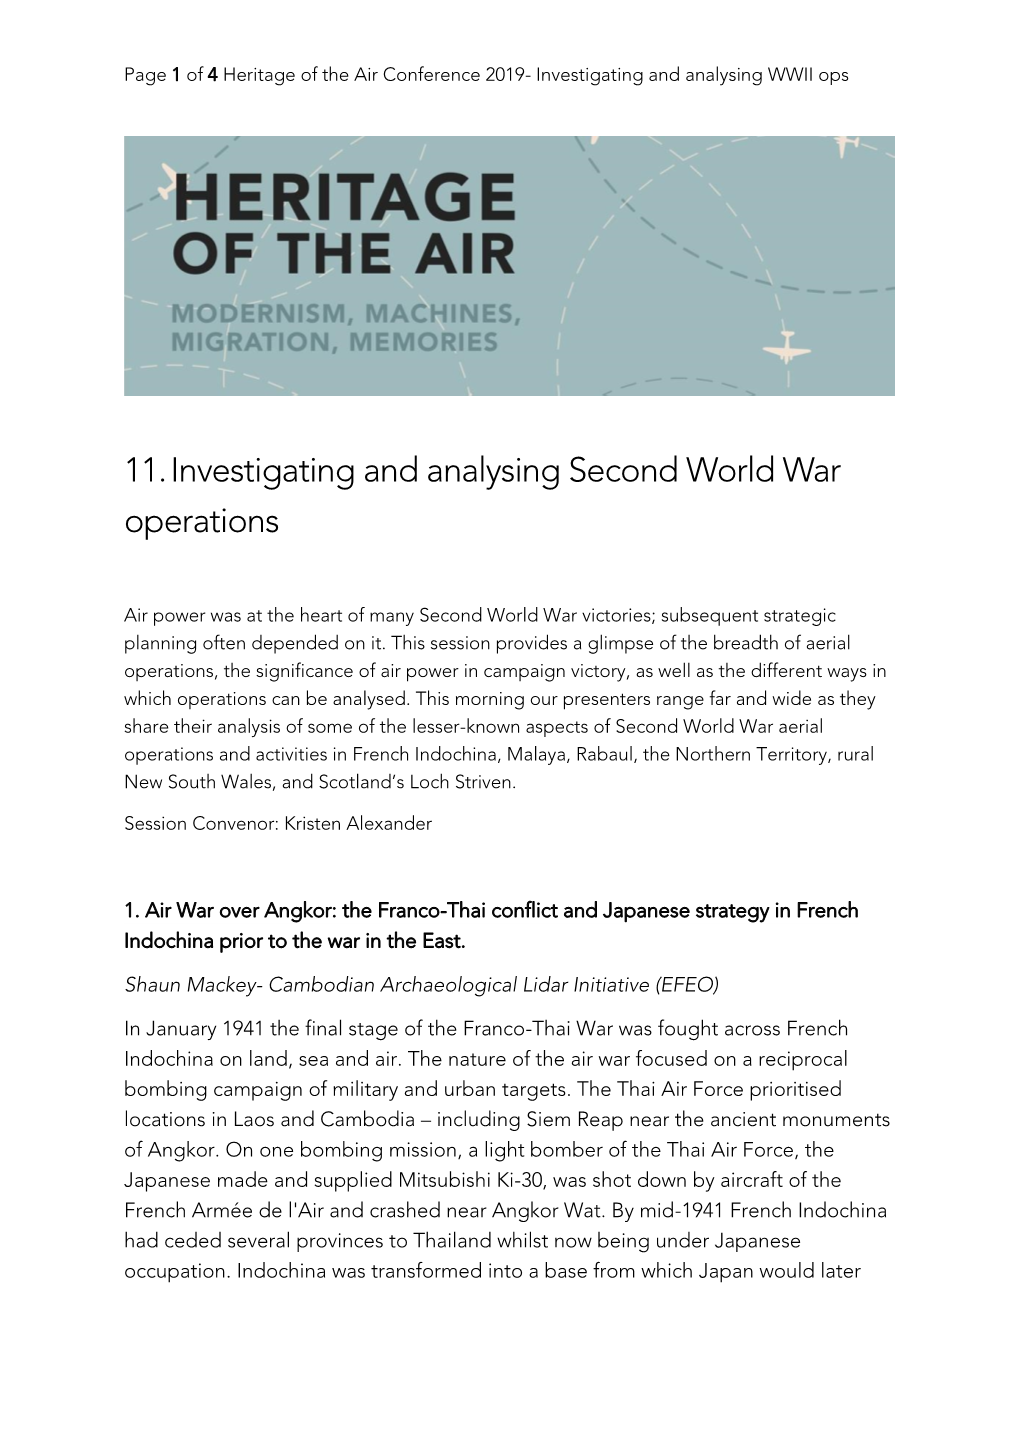 Investigating and Analysing WWII Ops Abstracts